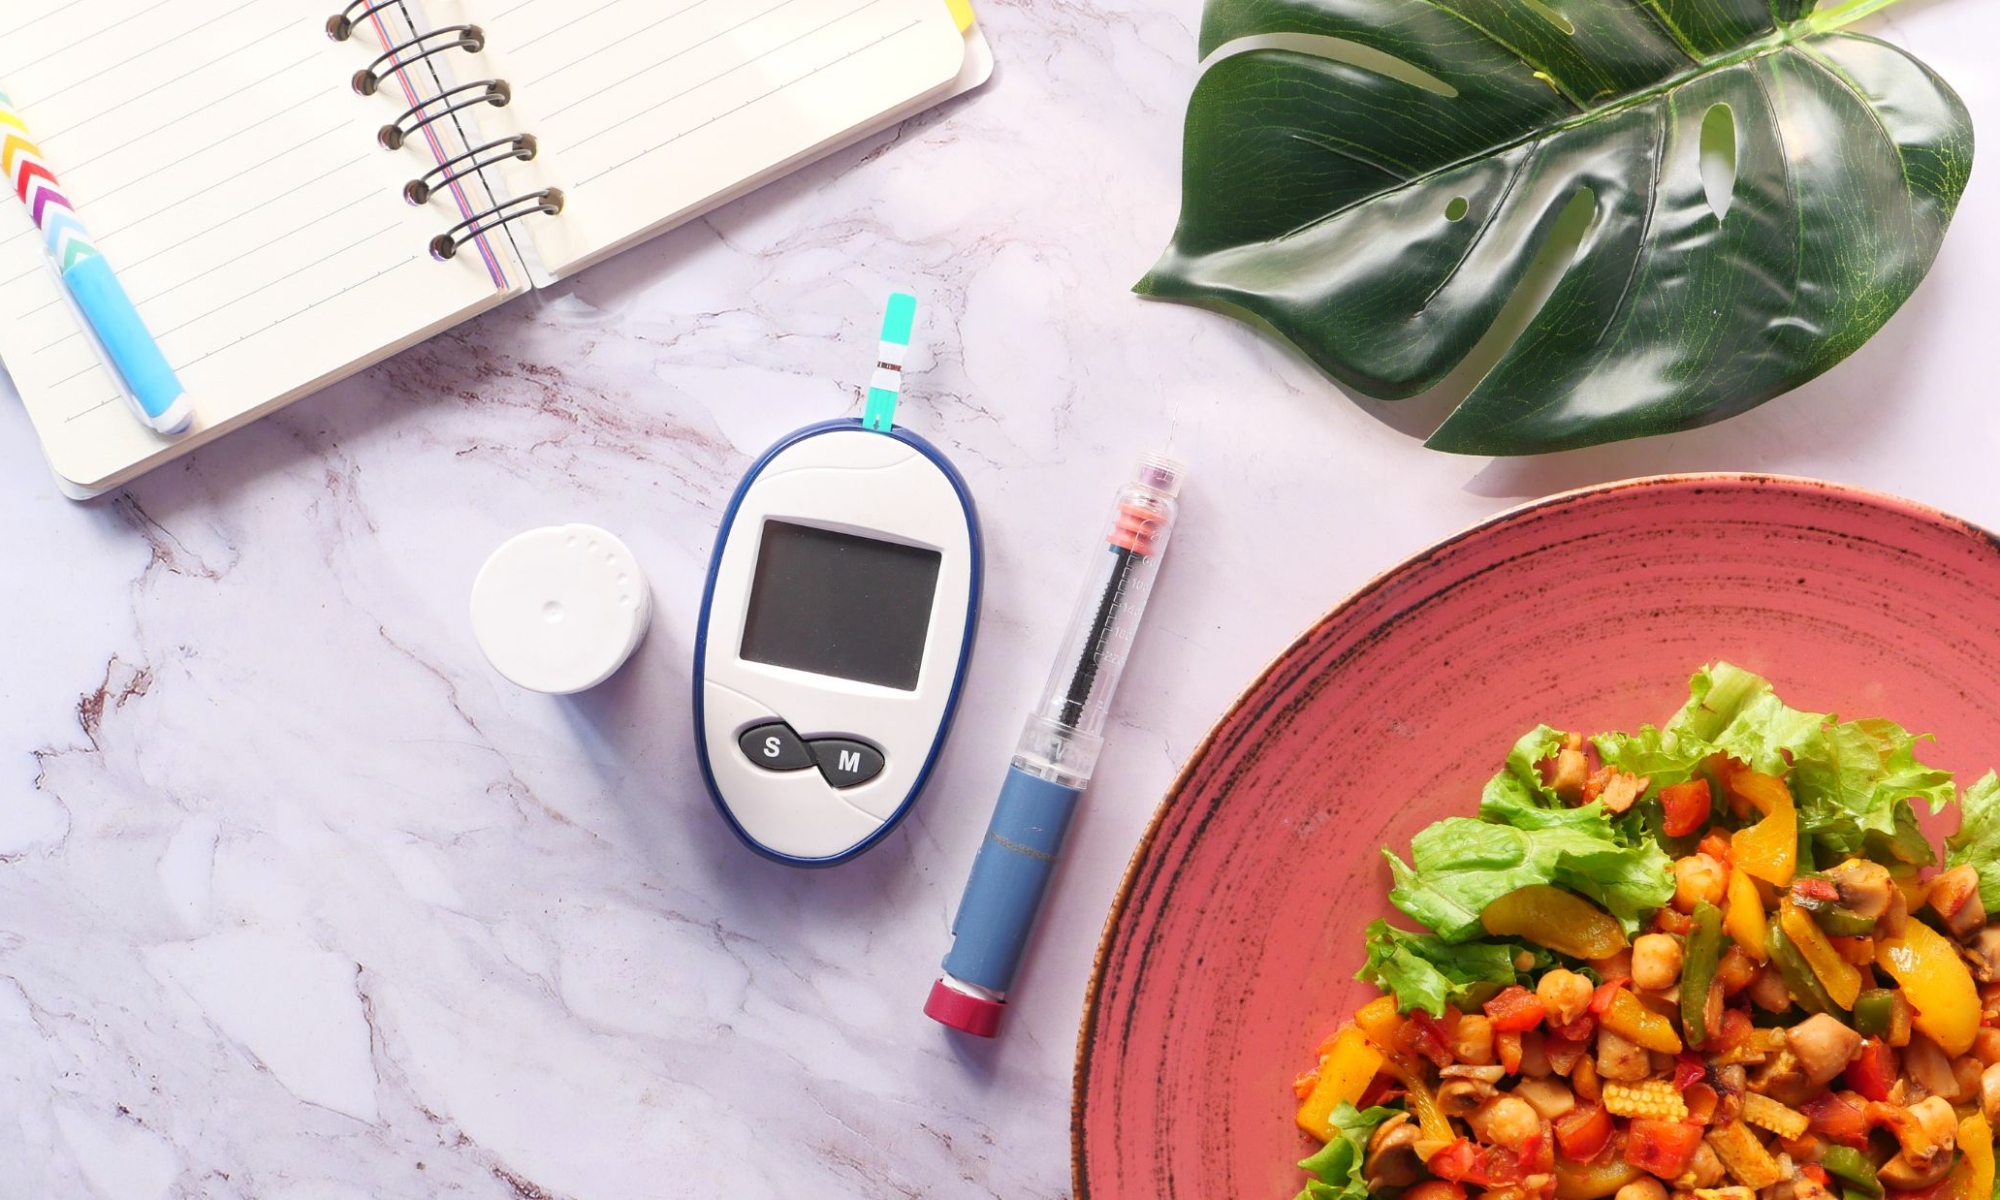 Manage Diabetes with Plate Method